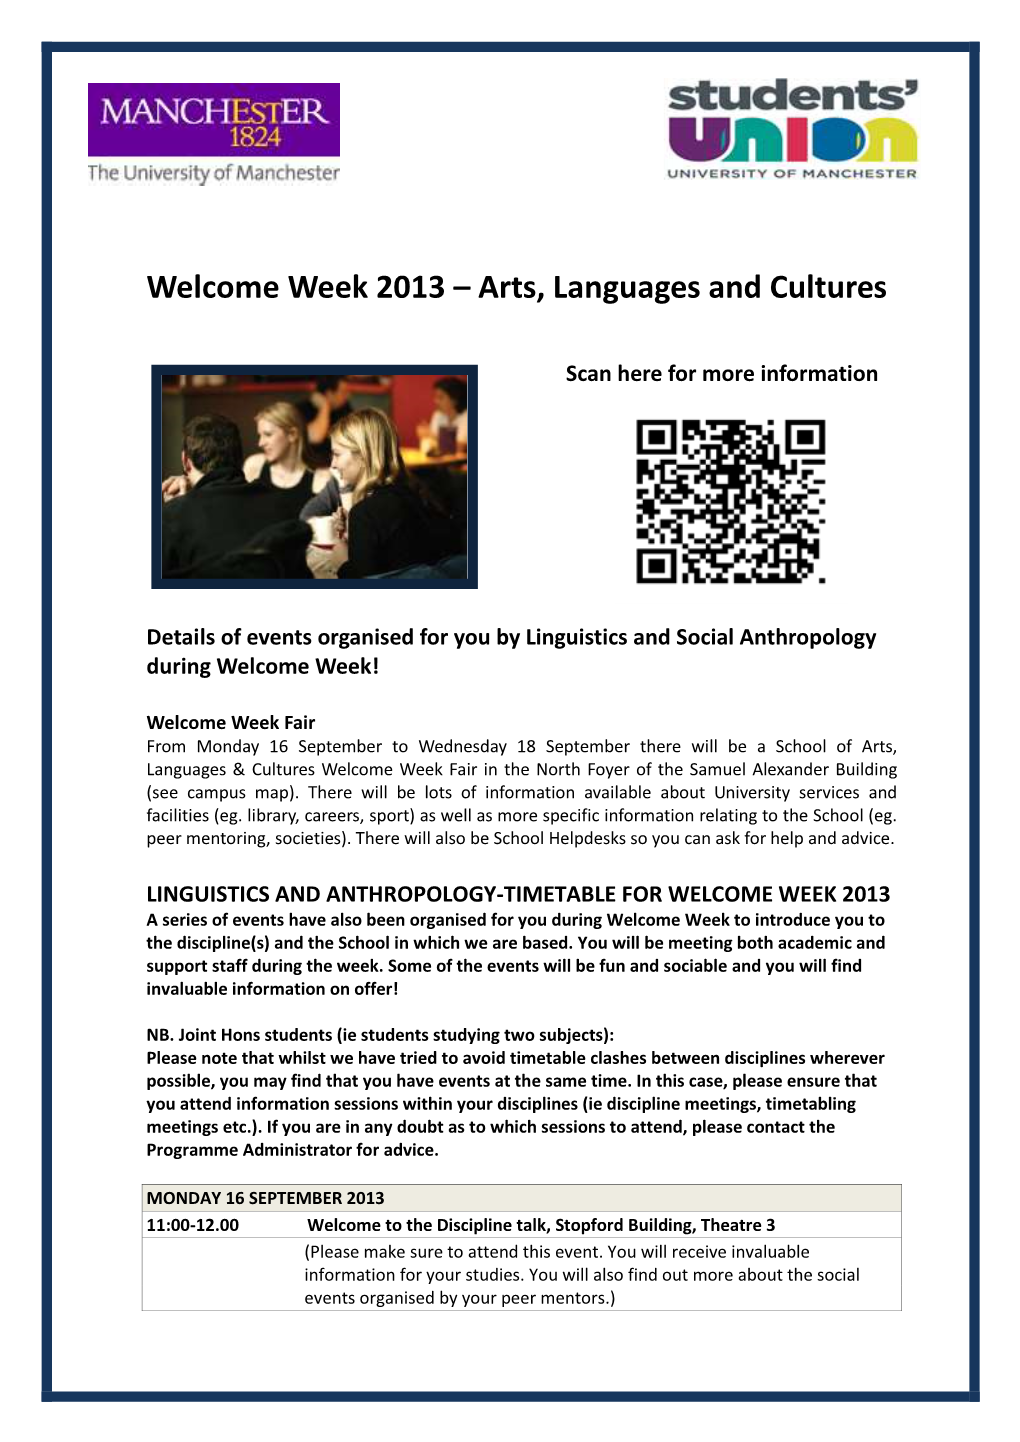 Arts, Languages and Cultures